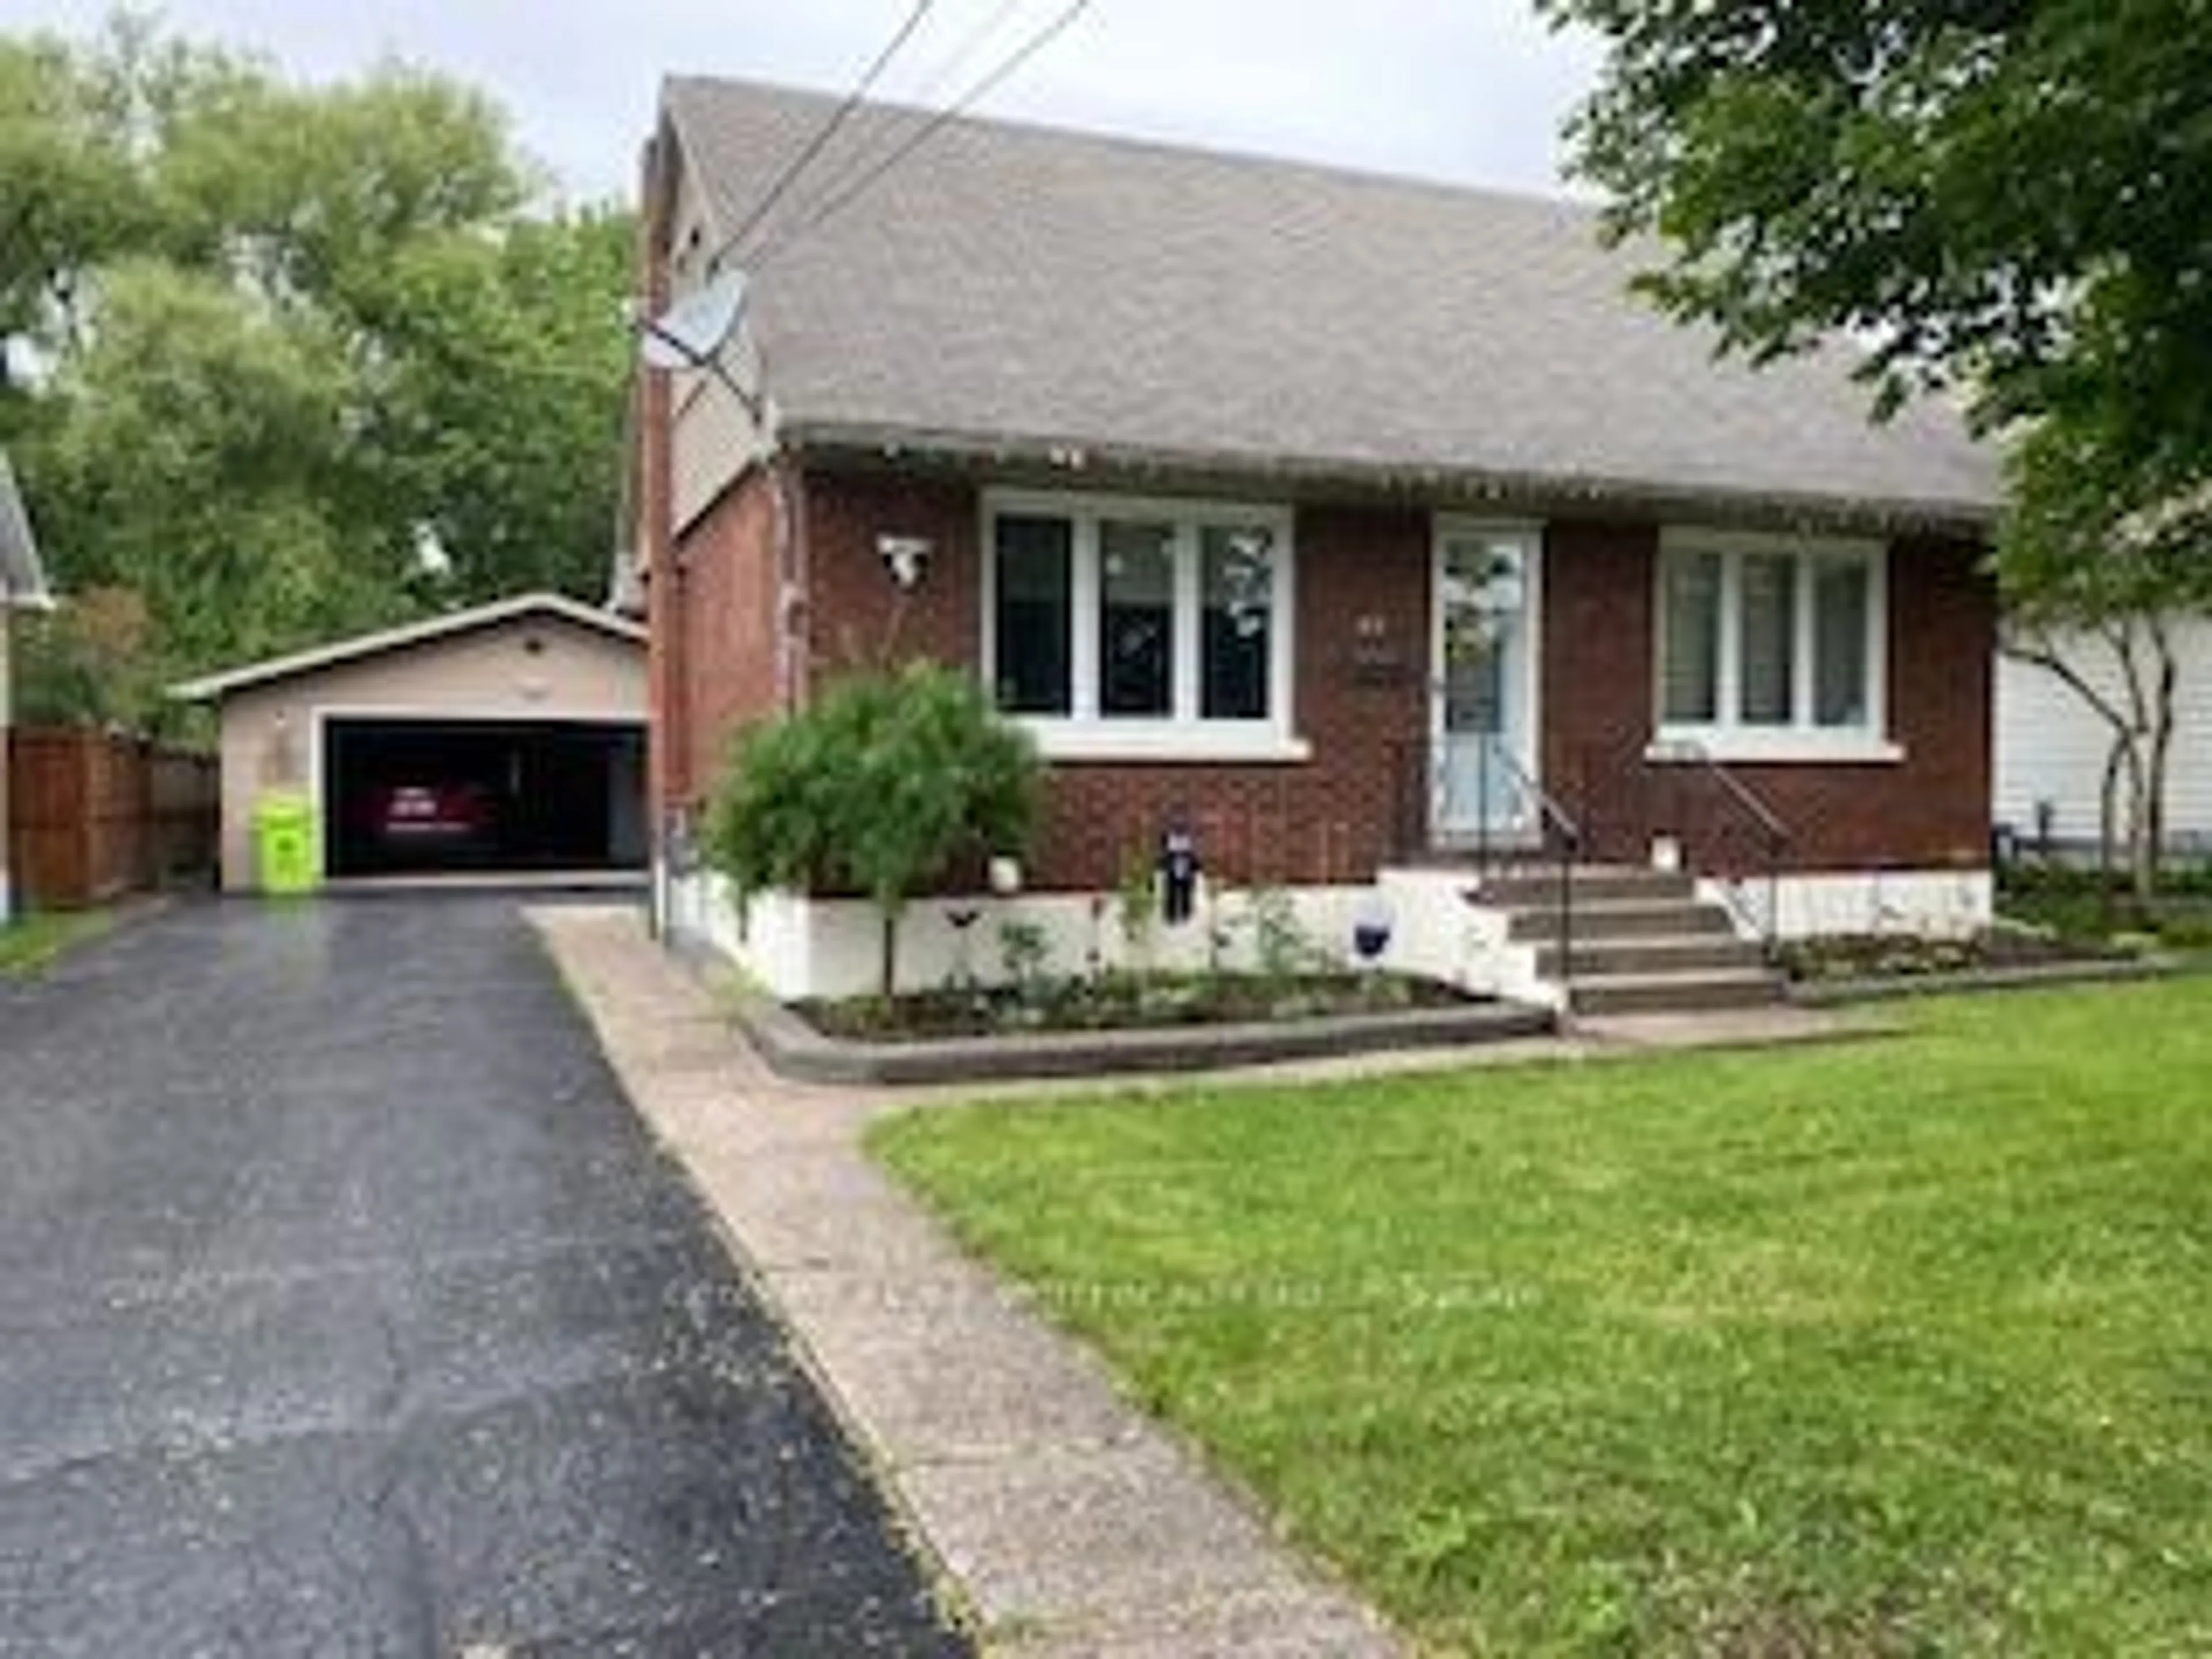 Home with brick exterior material for 49 Grandview Ave, Sault Ste Marie Ontario P6B 3V7